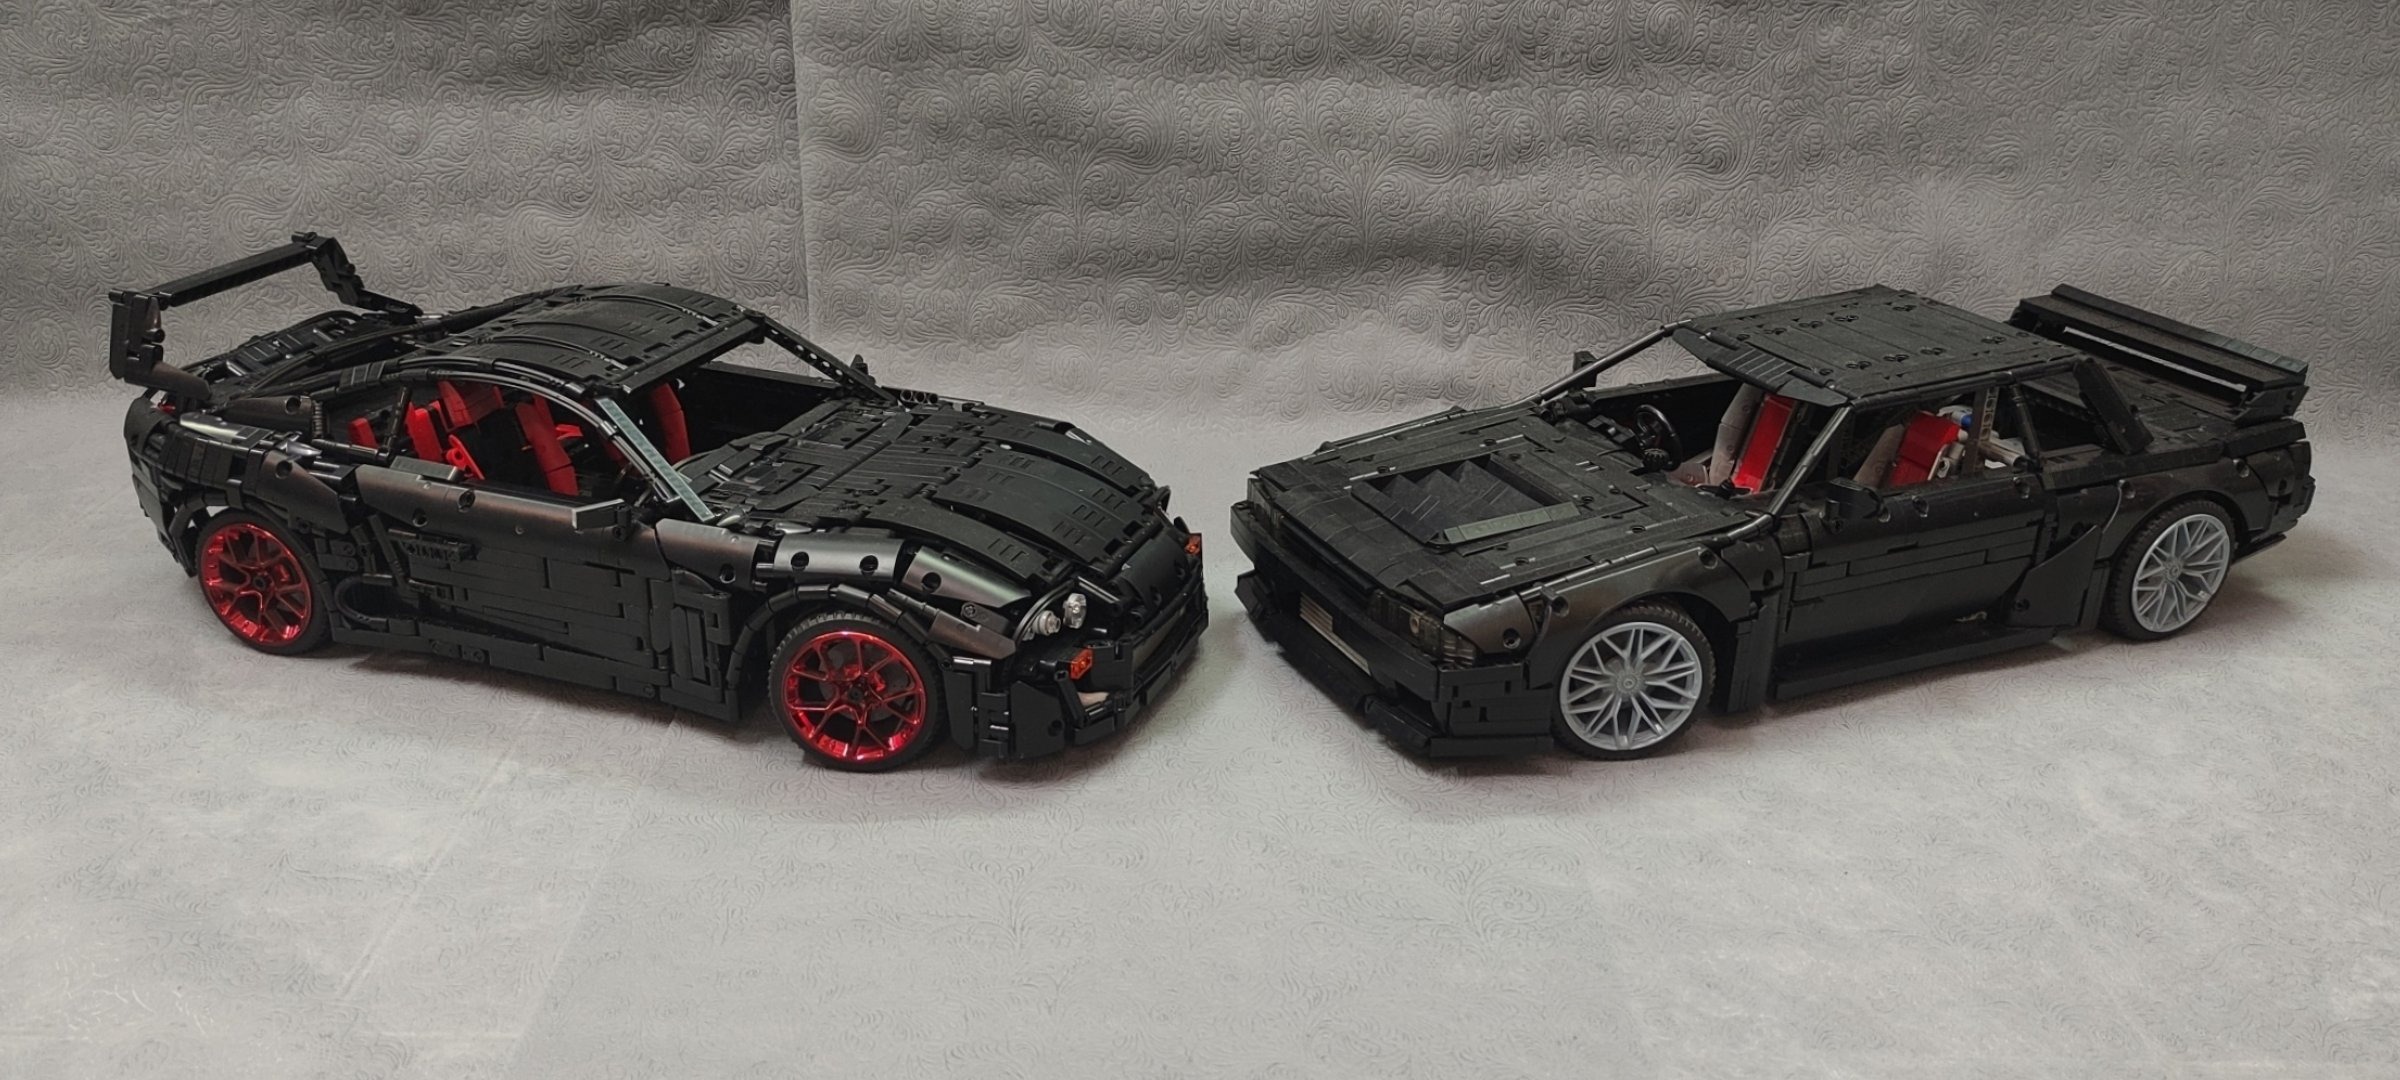 Toyota Supra MK4 A80 TECHNICIAN MOC-62982 by TheMatiss56 with 3804 pieces